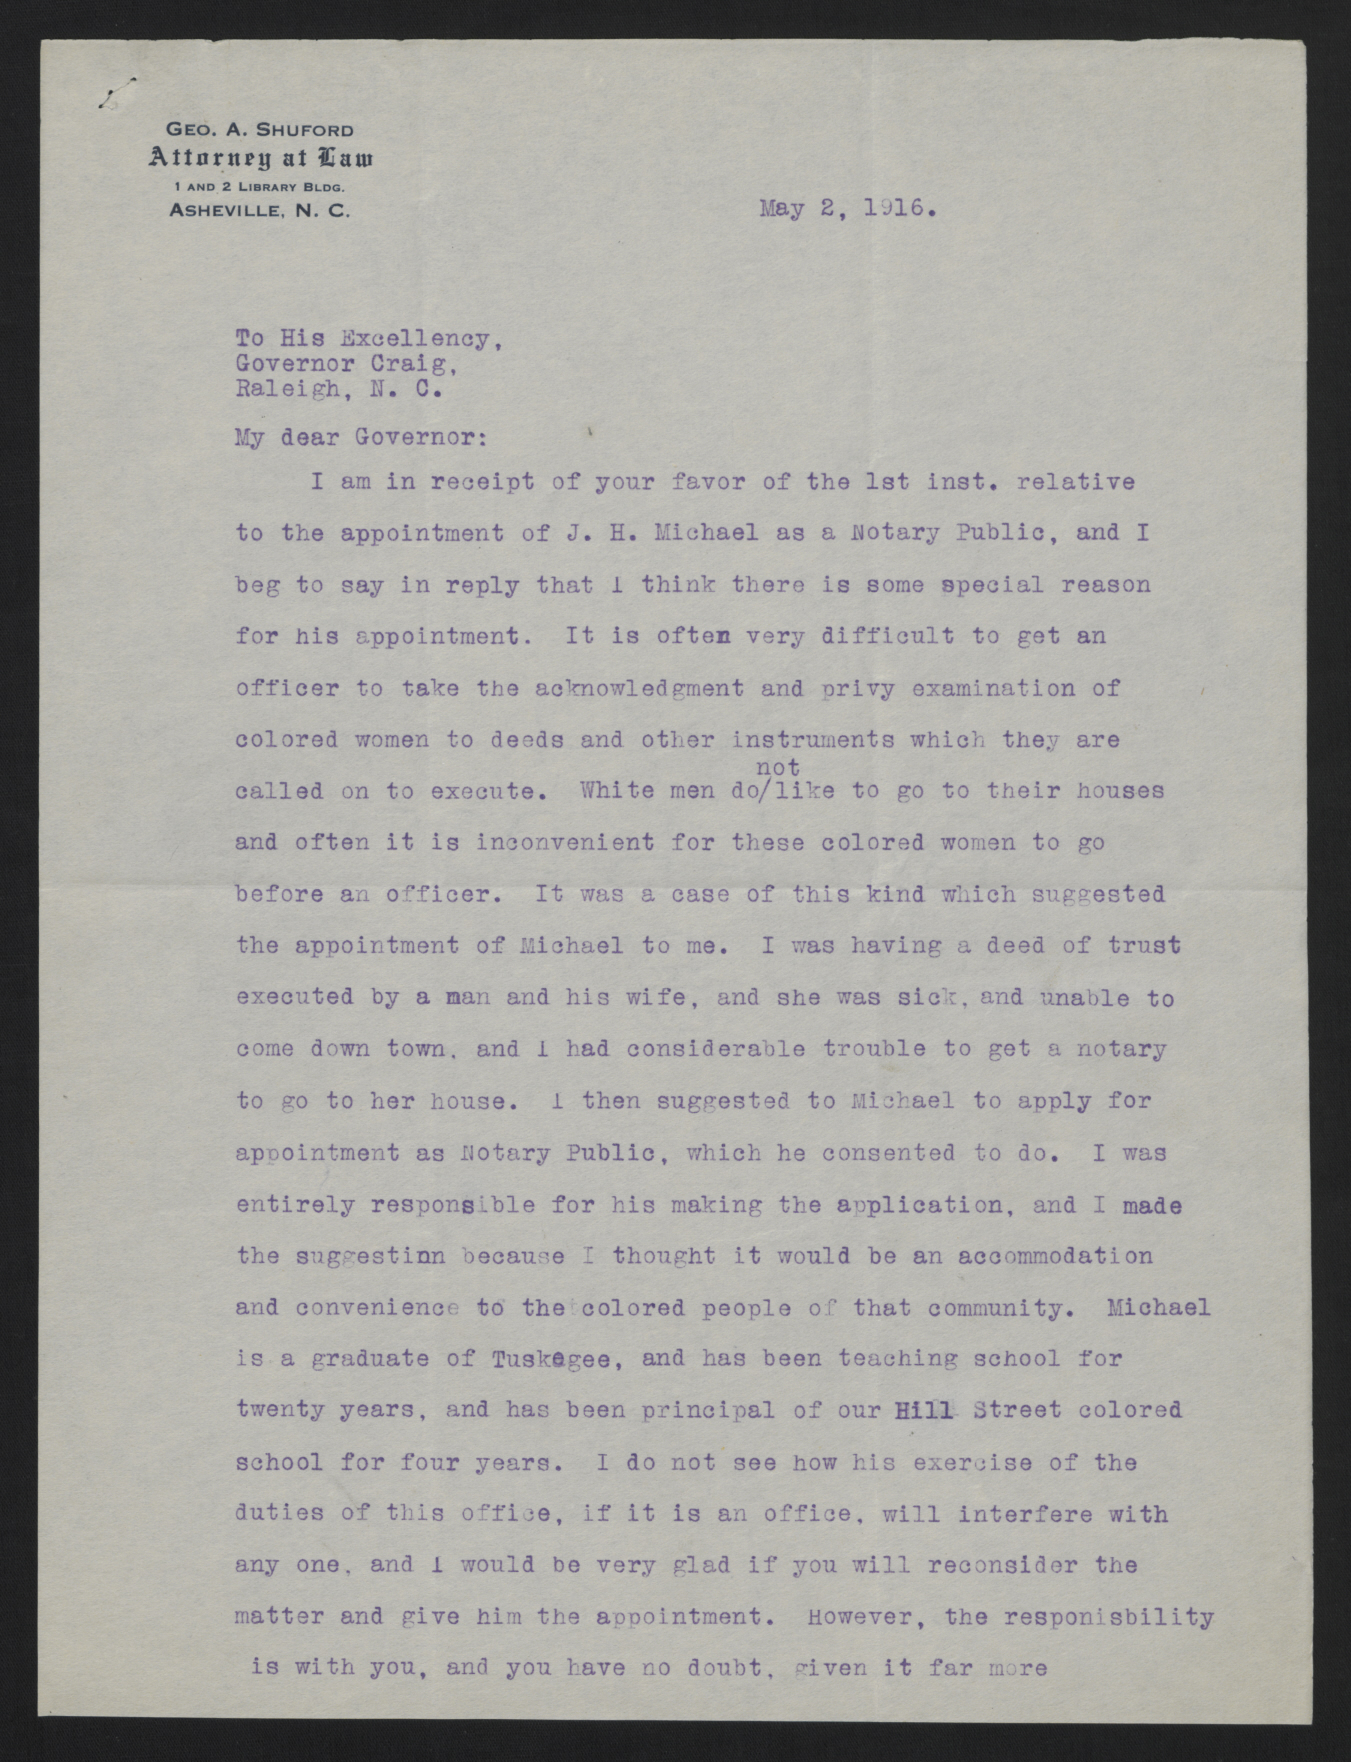 Letter from Shuford to Craig, May 2, 1916, page 1